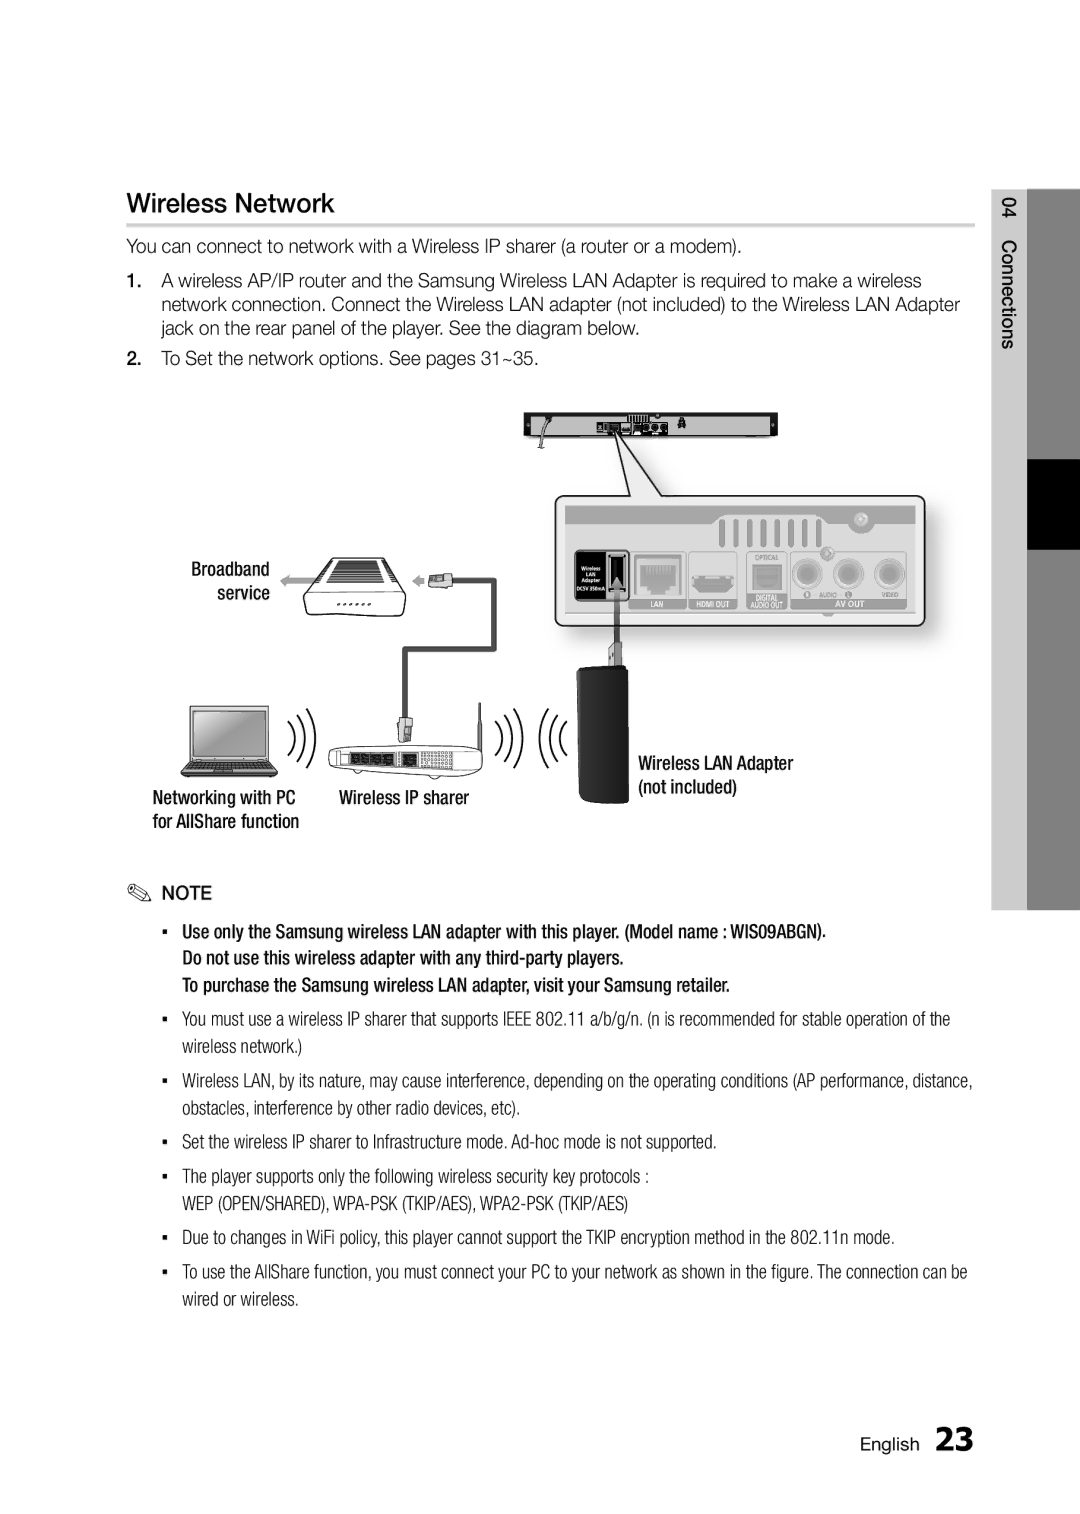 Samsung BD-D5250C user manual Wireless Network, Networking with PC Wireless IP sharer, For AllShare function 